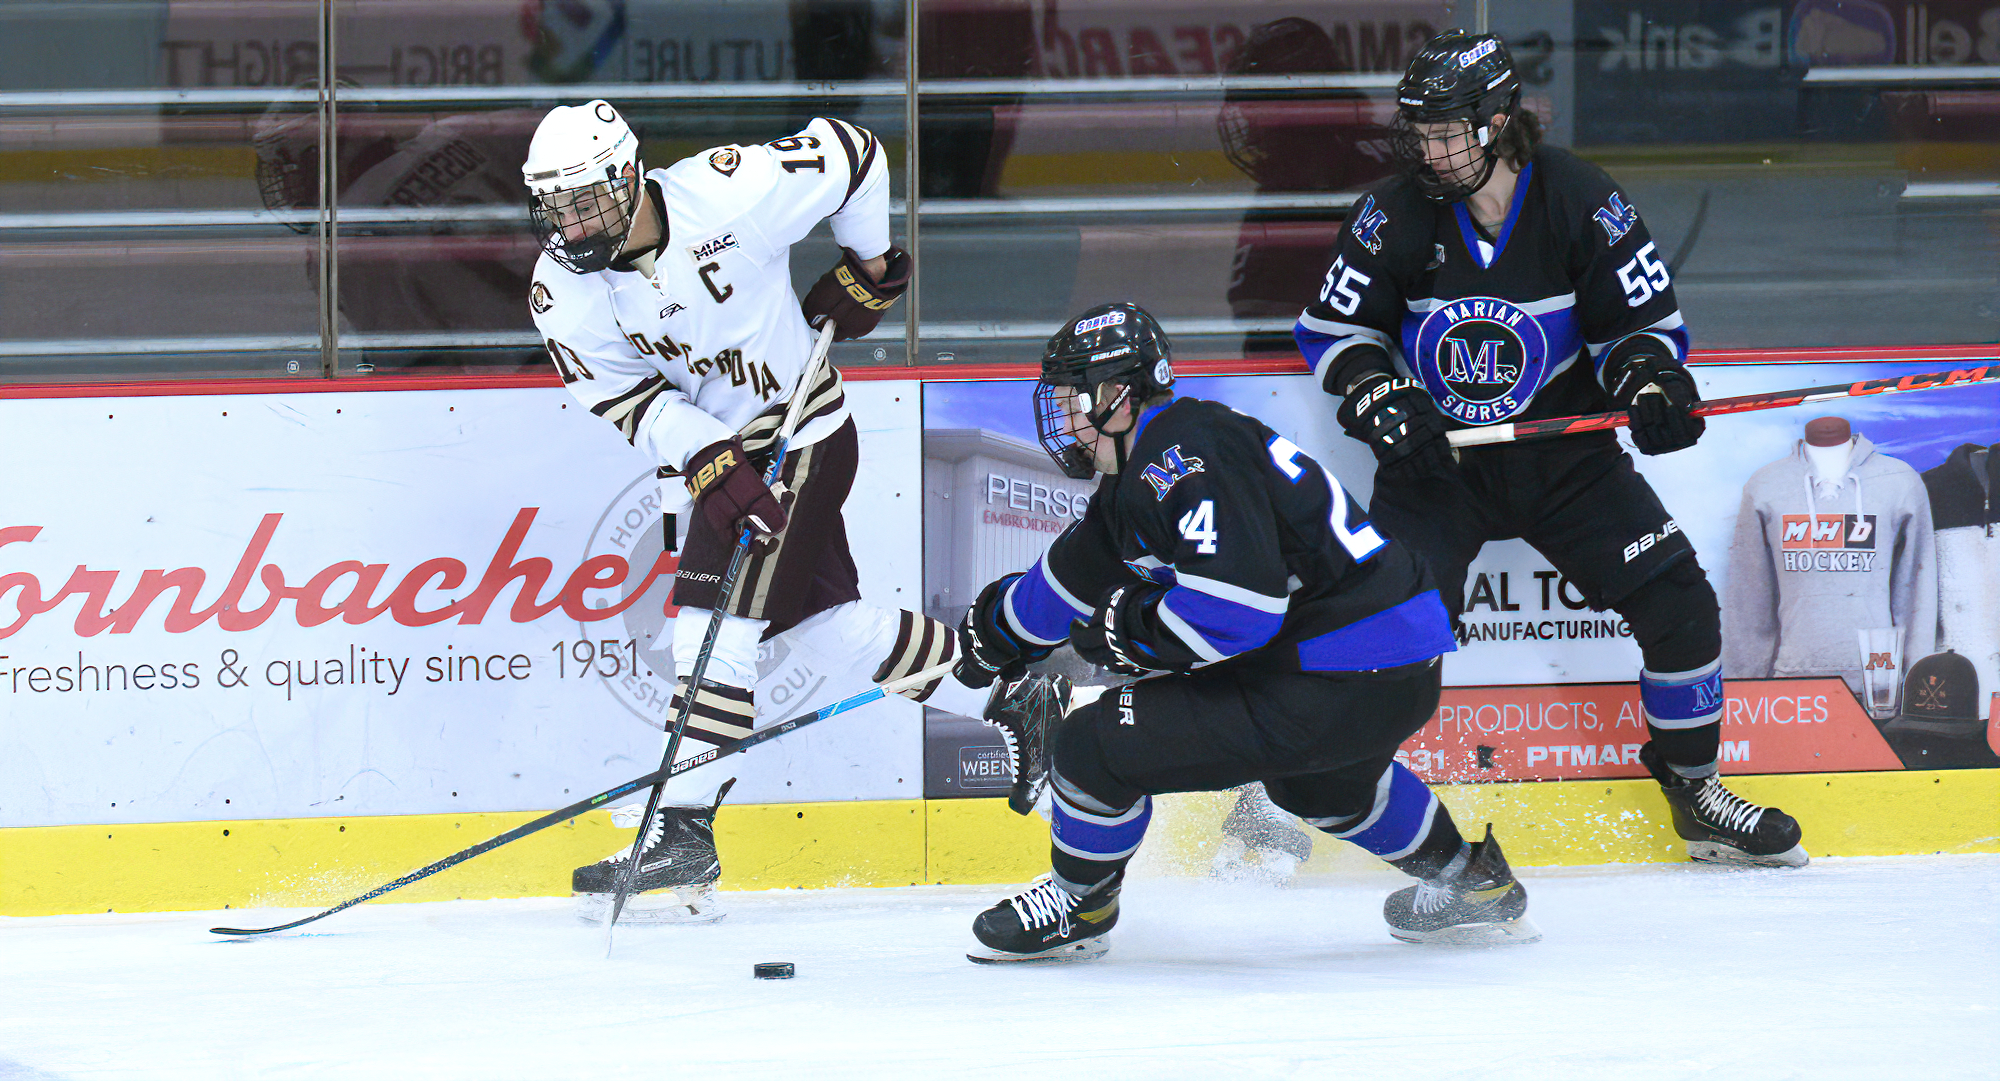 Senior All-American Tyler Bossert scored the Cobbers' second goal in their series finale with Marian.